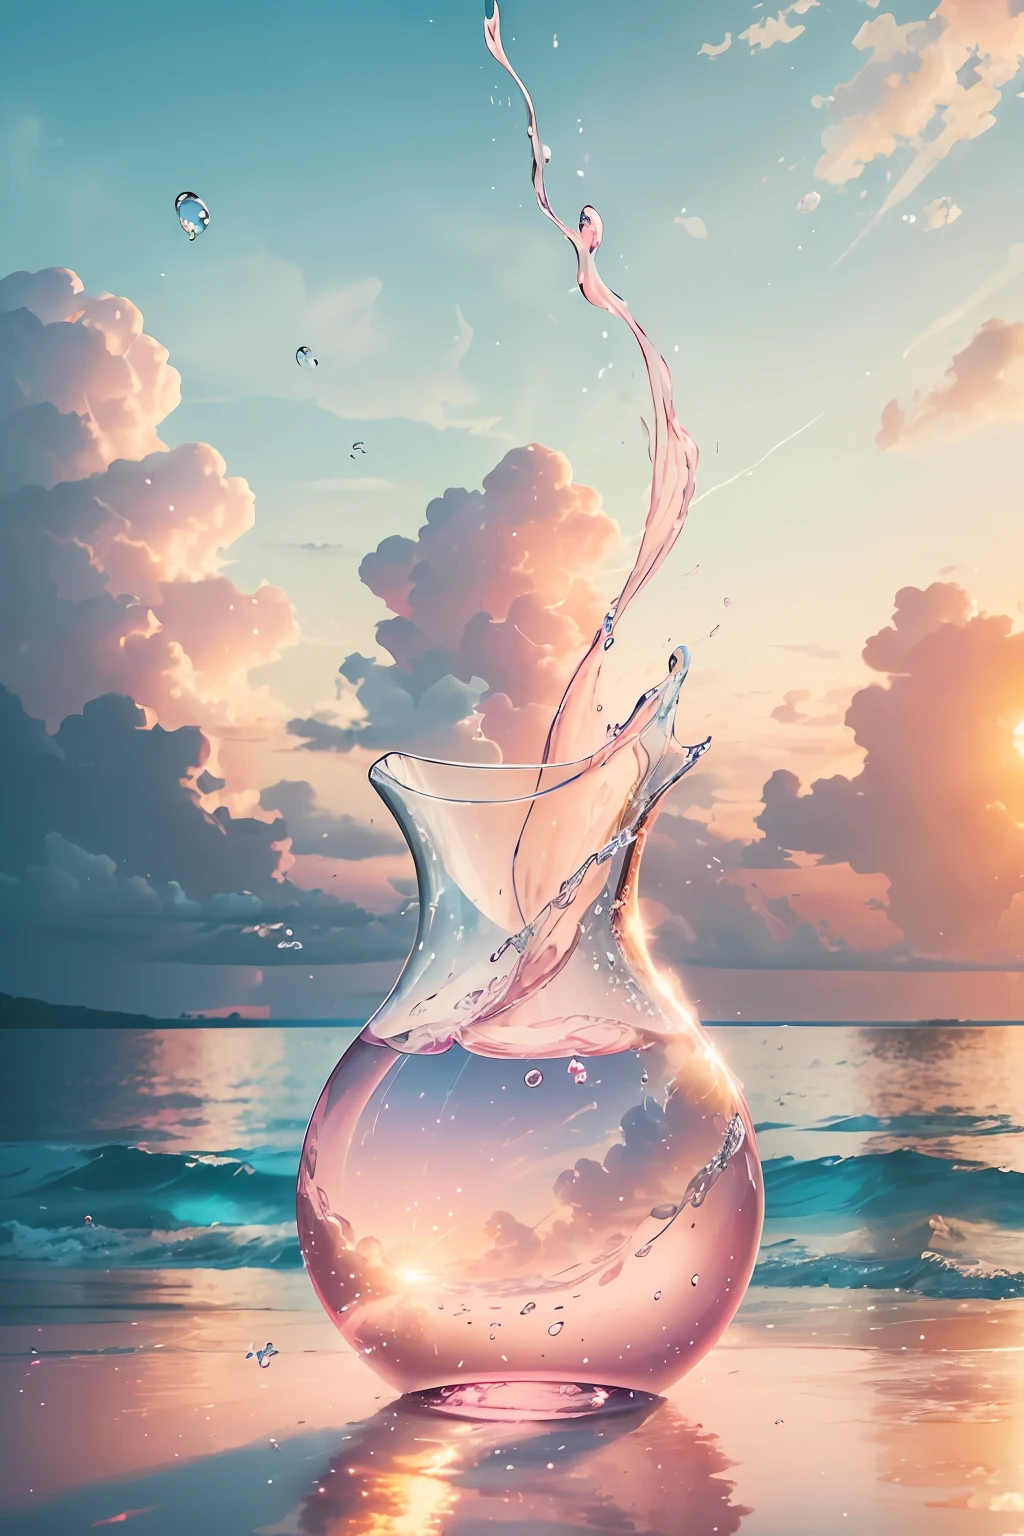 Create a 4K 9:16 image that depicts a stunning sunrise on a tropical beach, with gentle waves and palm trees along the coast. The color palette should be vibrant and convey a sense of renewal and positive energy.  Picture a clear glass vase filled with a soft pink cloud. The cloud is made up of tiny bubbles, each reflecting a spark of light. You can see that the bubbles are constantly moving, shifting and swirling within the vase. But despite their ephemeral nature, they leave a lasting impression on the vase itself. As the light filters through the pink cloud, it casts a gentle glow on the glass, changing its very essence. Just like the bubbles, moments of joy may be fleeting and temporary, but the impression they leave on your soul is like the soft pink cloud, illuminating your very being and changing you forever.